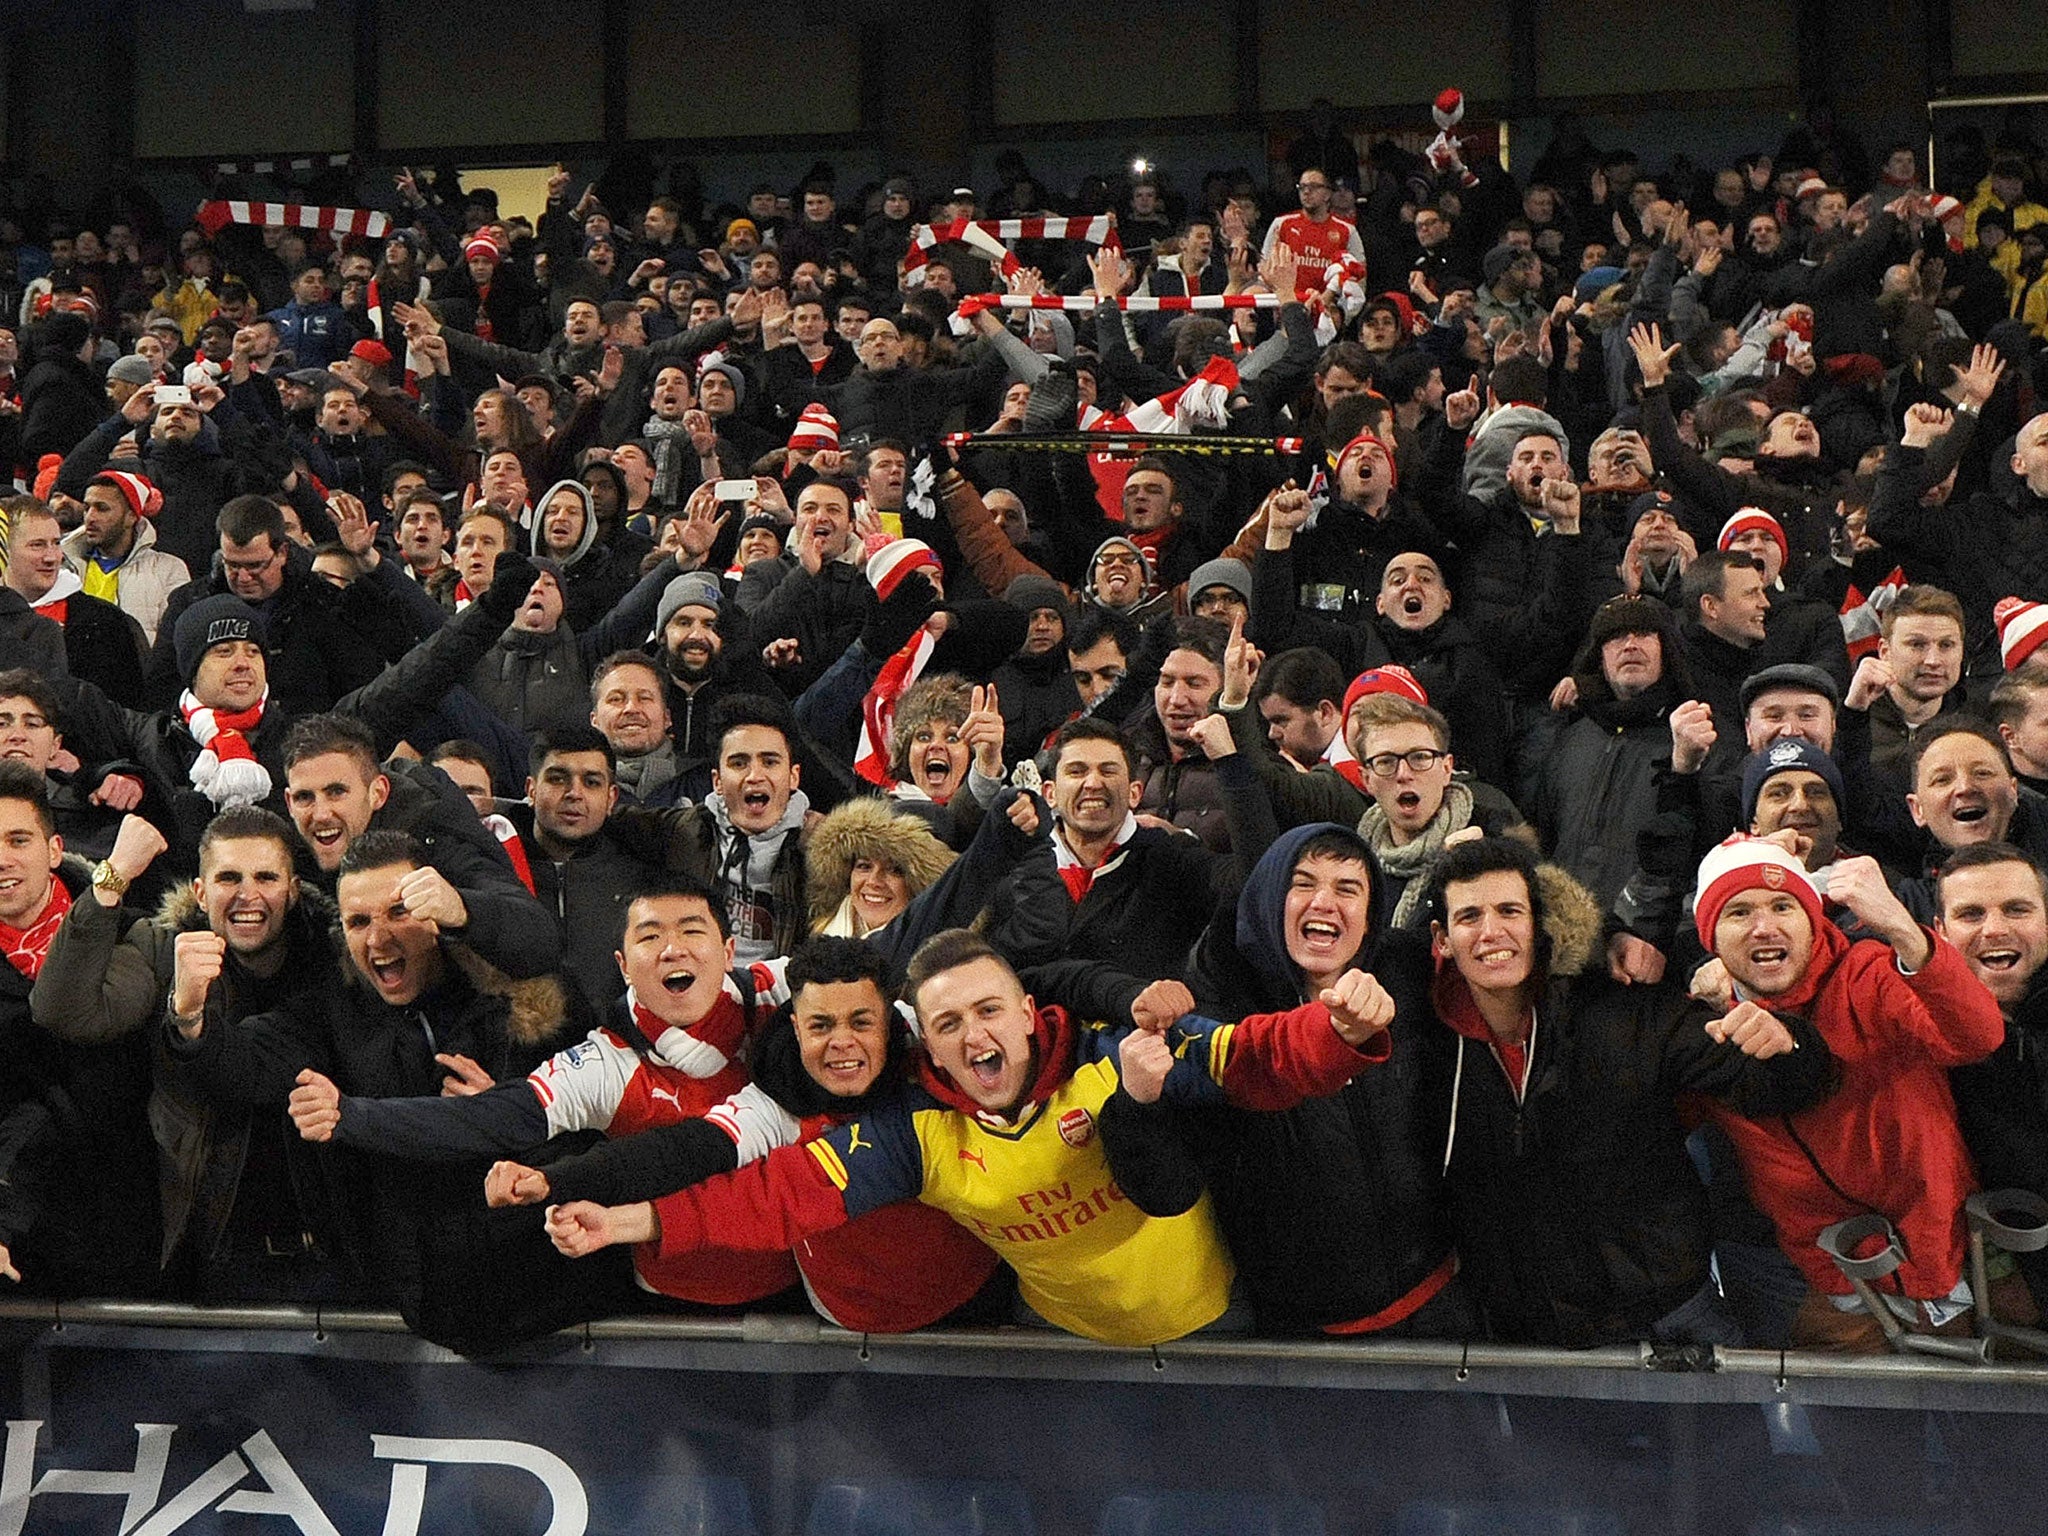 Arsenal supporters celebrate the win over Manchester United's rivals, Manchester City, at the Etihad Stadium back in January